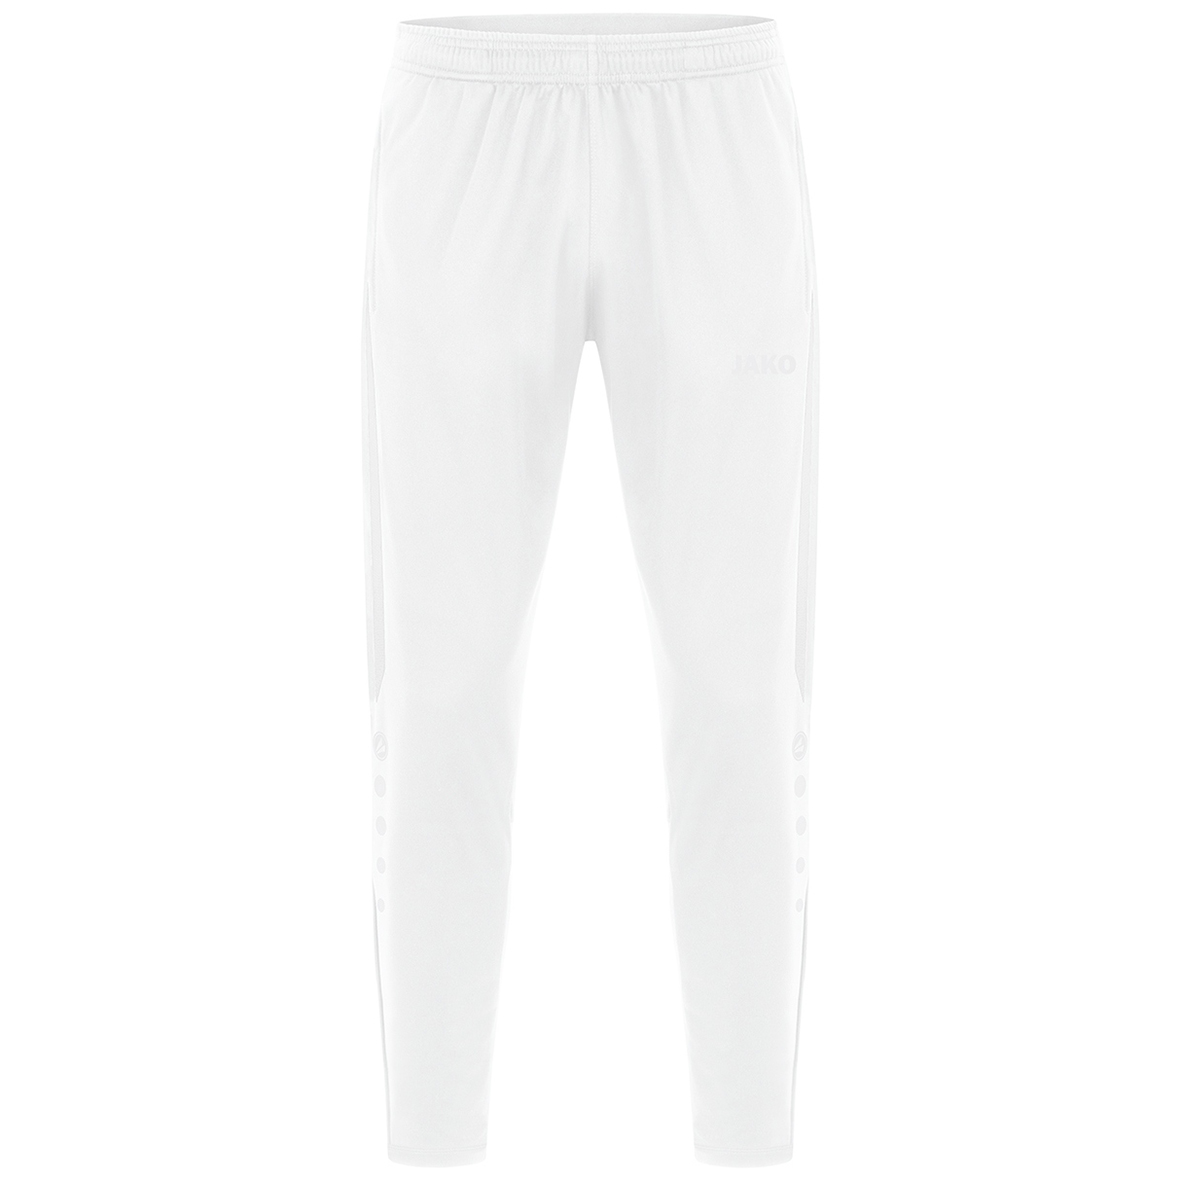 JAKO POWER POLYESTER TROUSERS, WHITE KIDS.